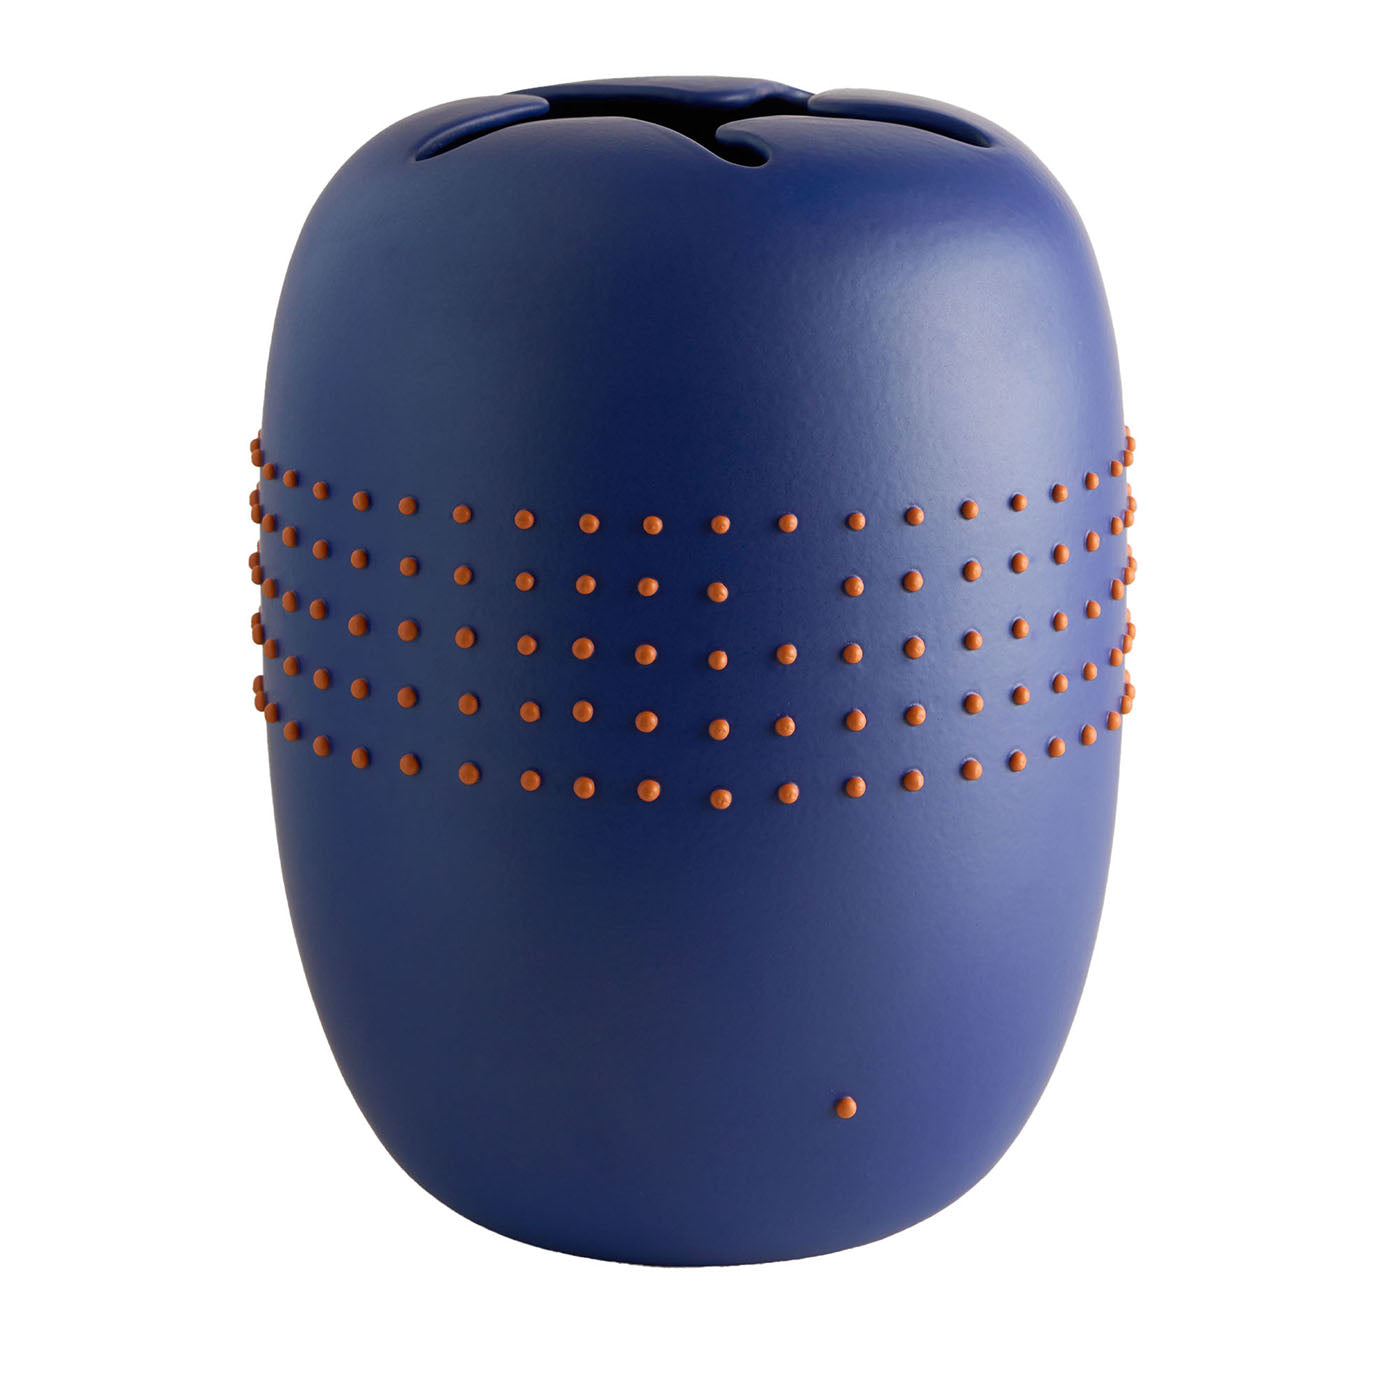 Code Blue Ceramic Vase with Red Dots By Arik Levy - Main view